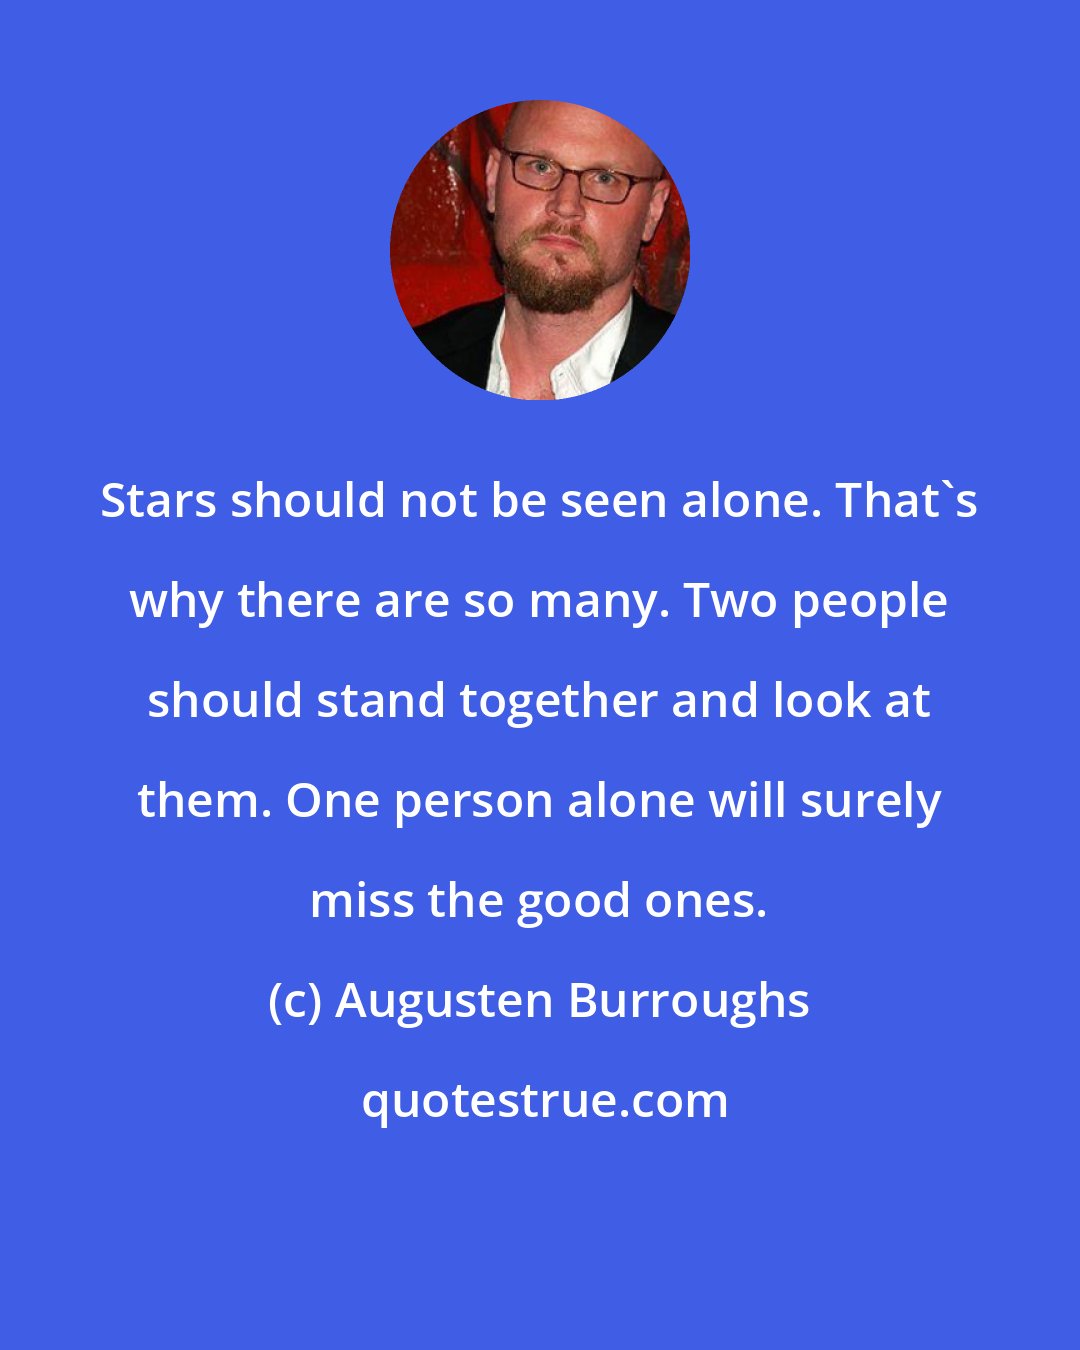 Augusten Burroughs: Stars should not be seen alone. That's why there are so many. Two people should stand together and look at them. One person alone will surely miss the good ones.